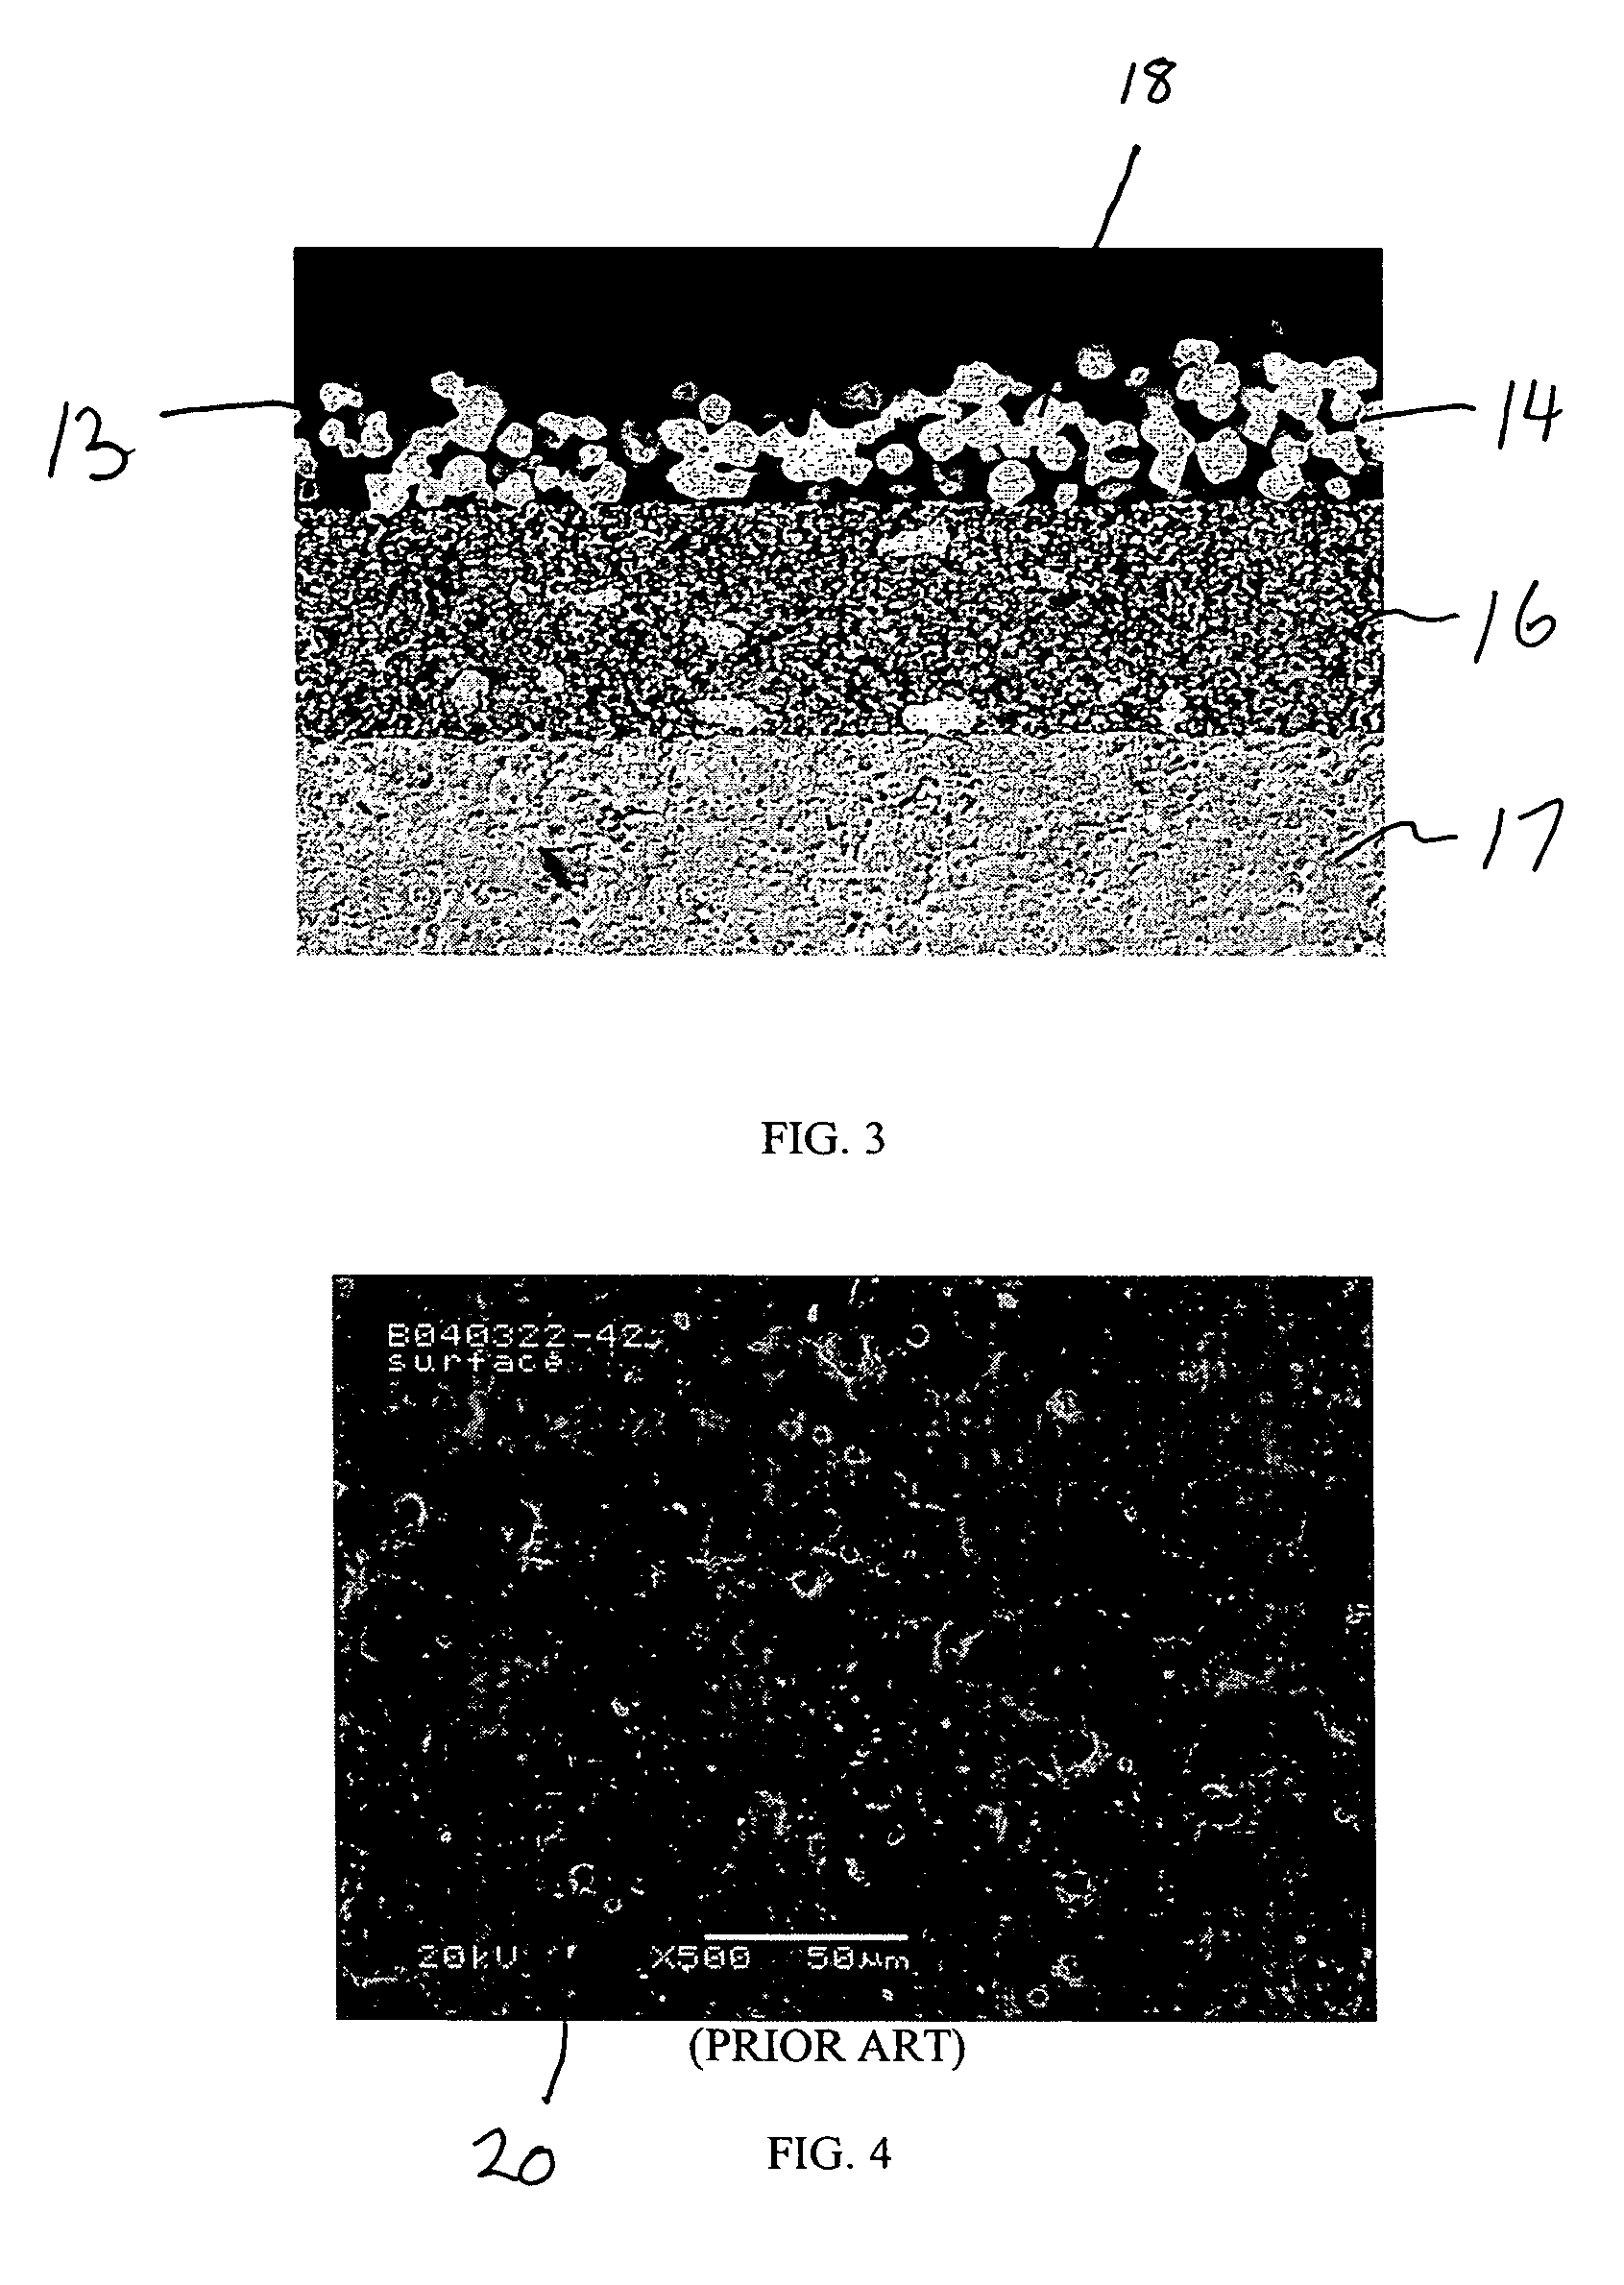 Current collector to conduct an electrical current to or from an electrode layer